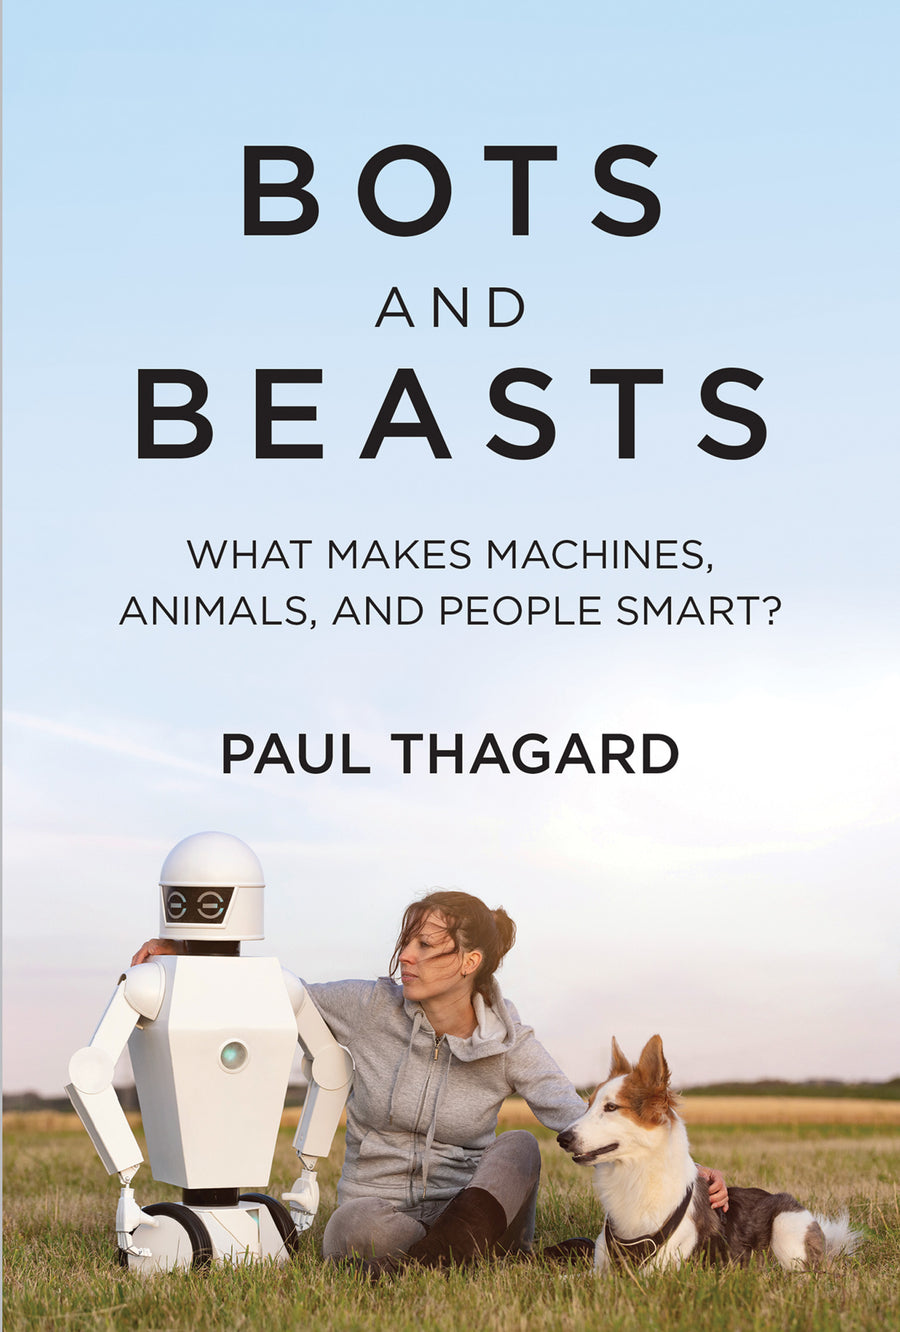 Bots and Beasts